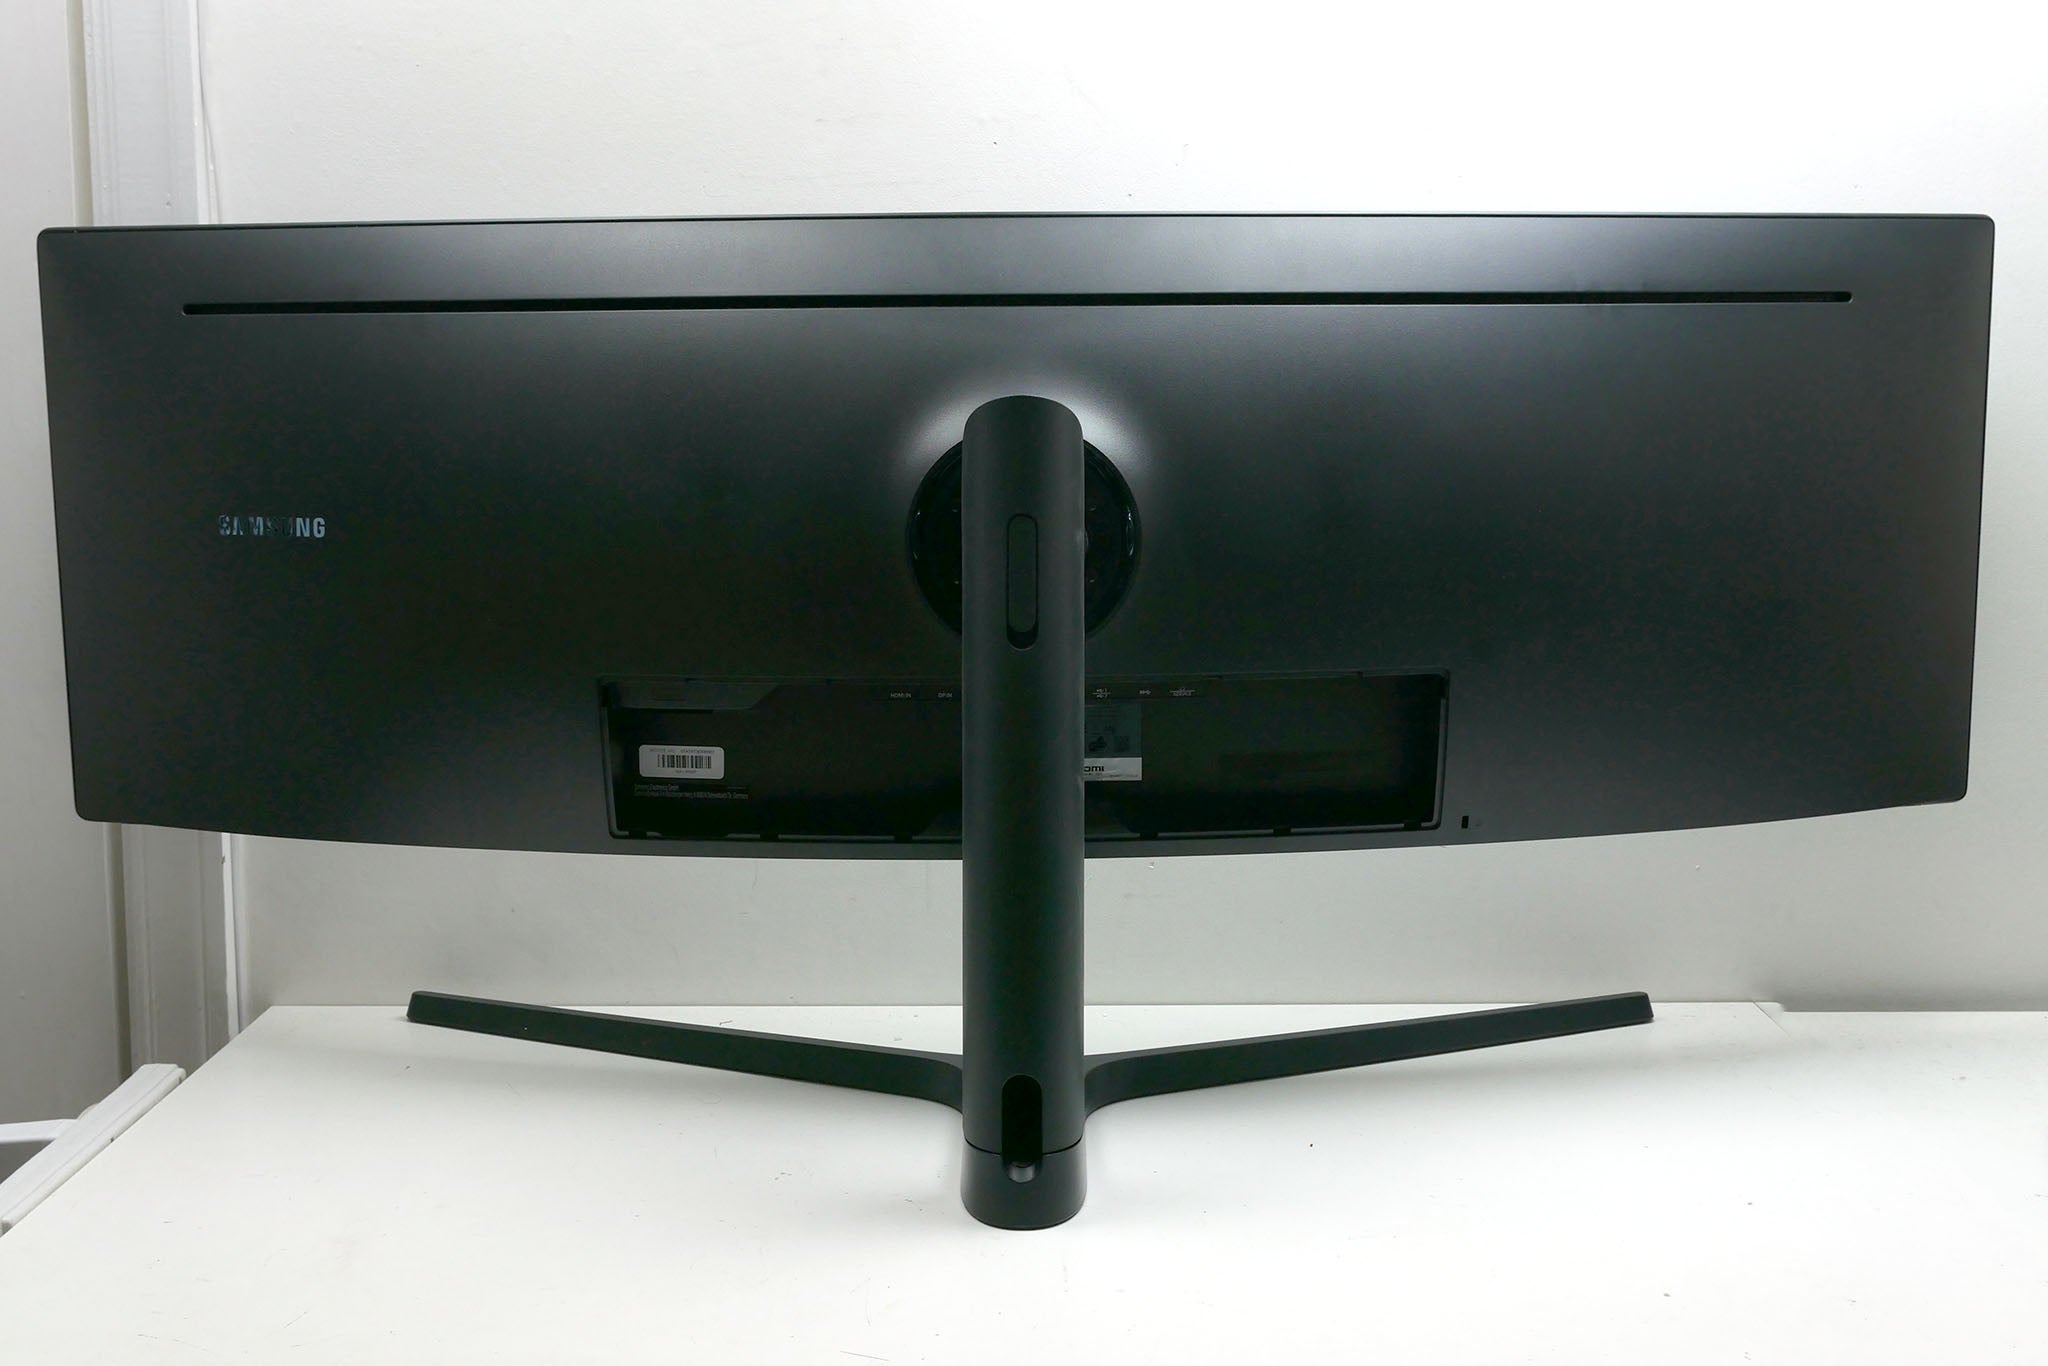 Samsung C49J89 monitor rear view with stand and ports visible.